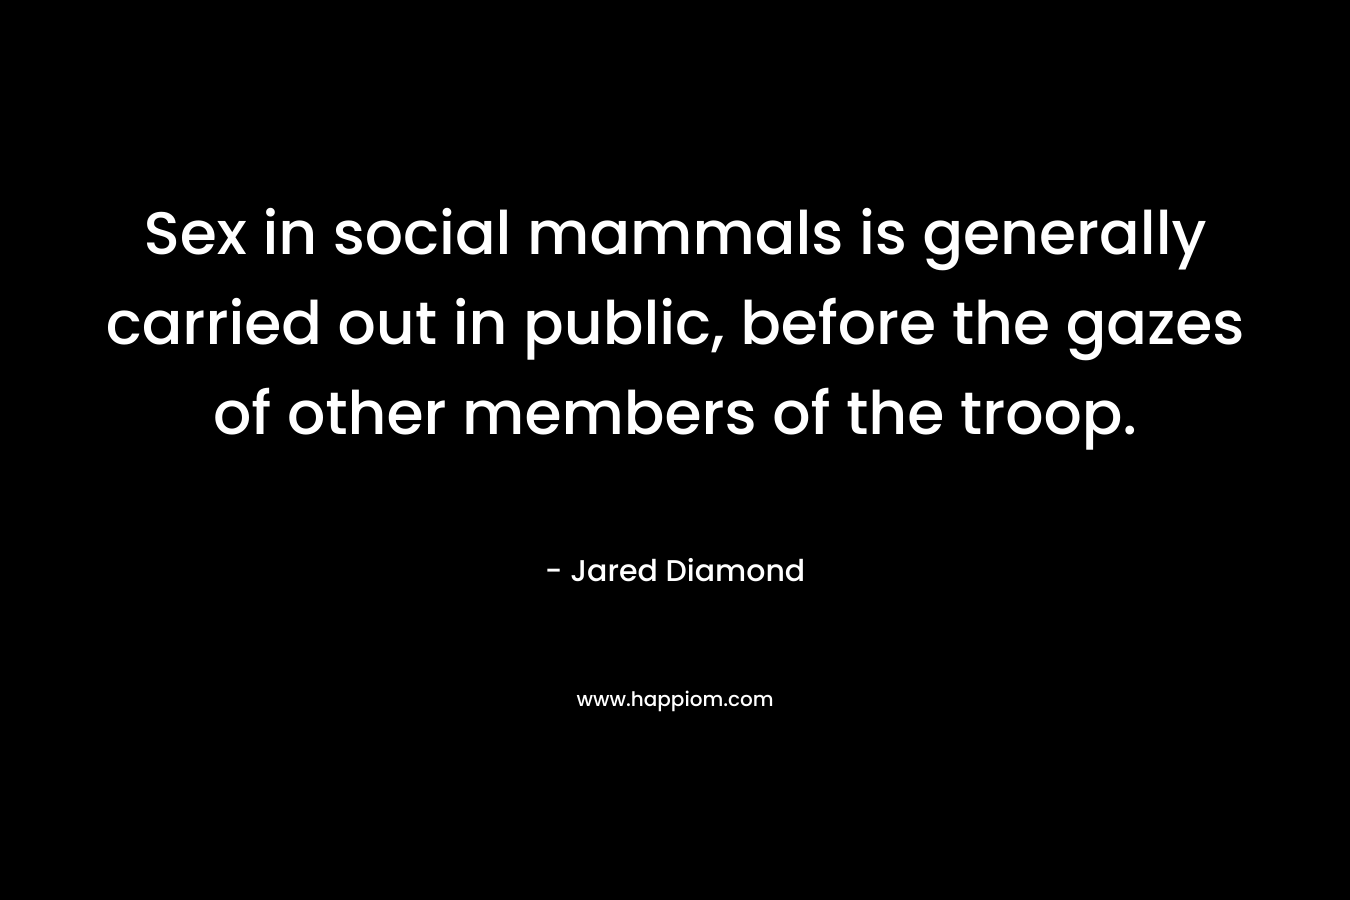 Sex in social mammals is generally carried out in public, before the gazes of other members of the troop.